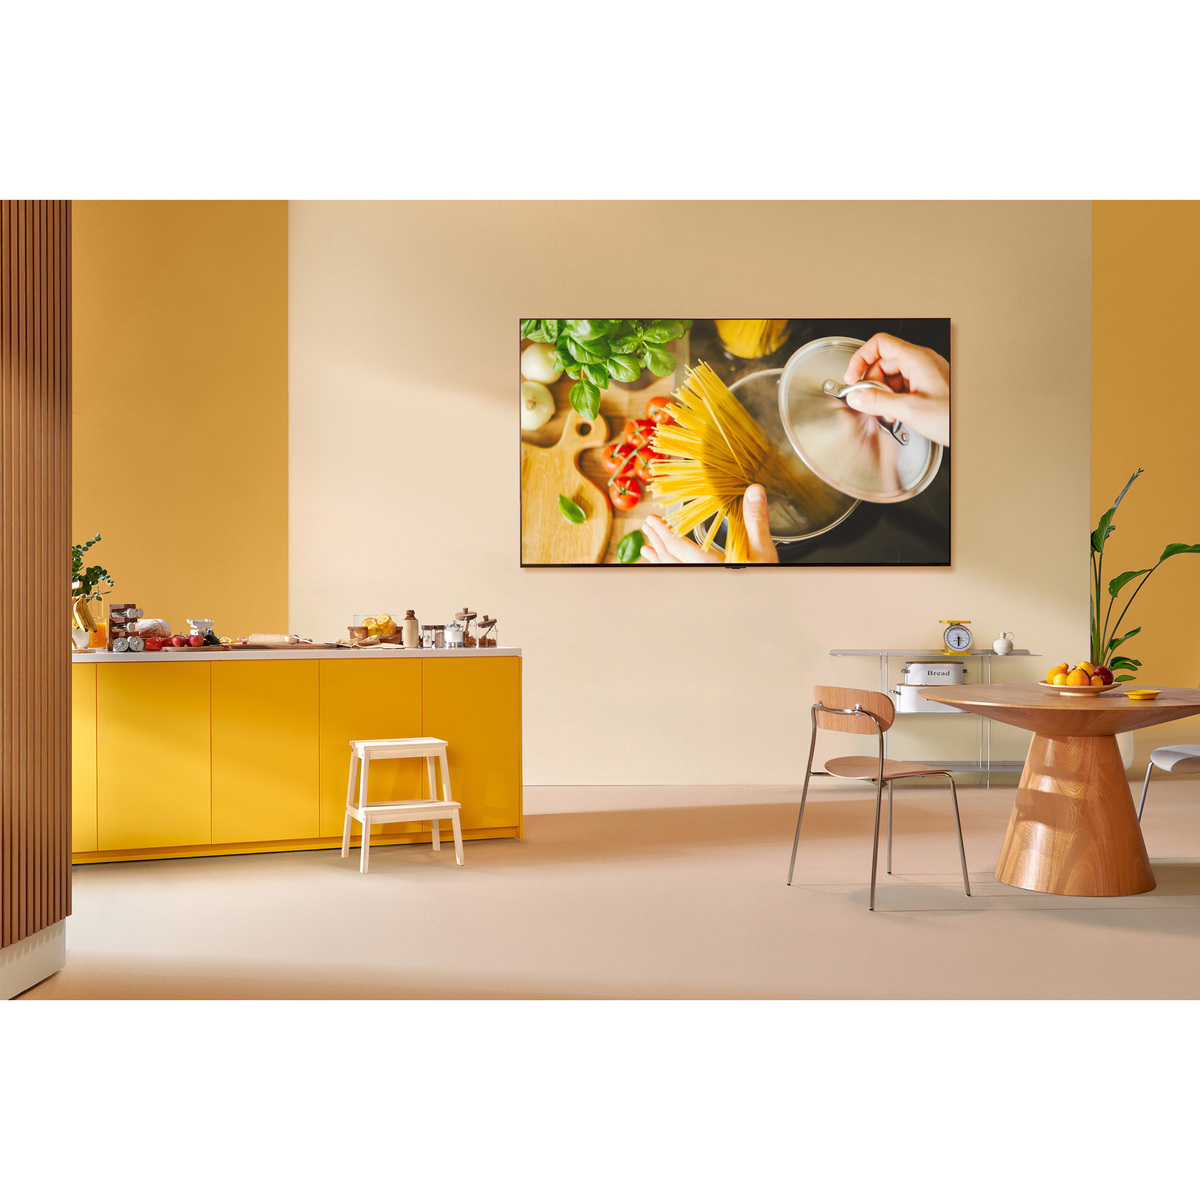 LG QNED TV 55 Inch QNED80 Series, New 2022, Cinema Screen Design 4K Active HDR webOS22 with ThinQ AI - 55QNED806QA